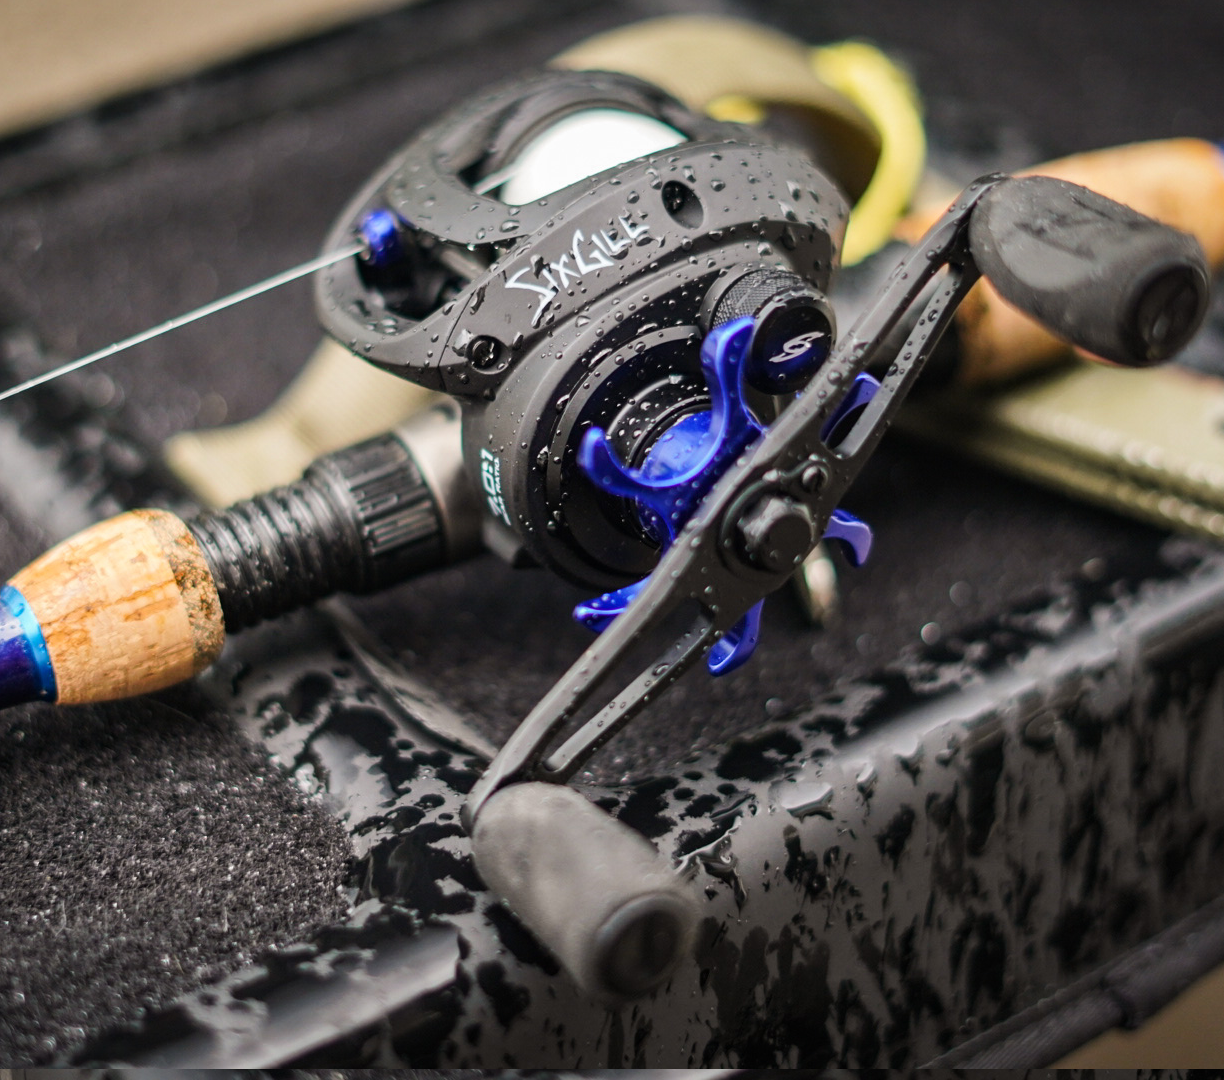 Sixgill How To  Upgrade or Change Your Bait Casting Reel Handle